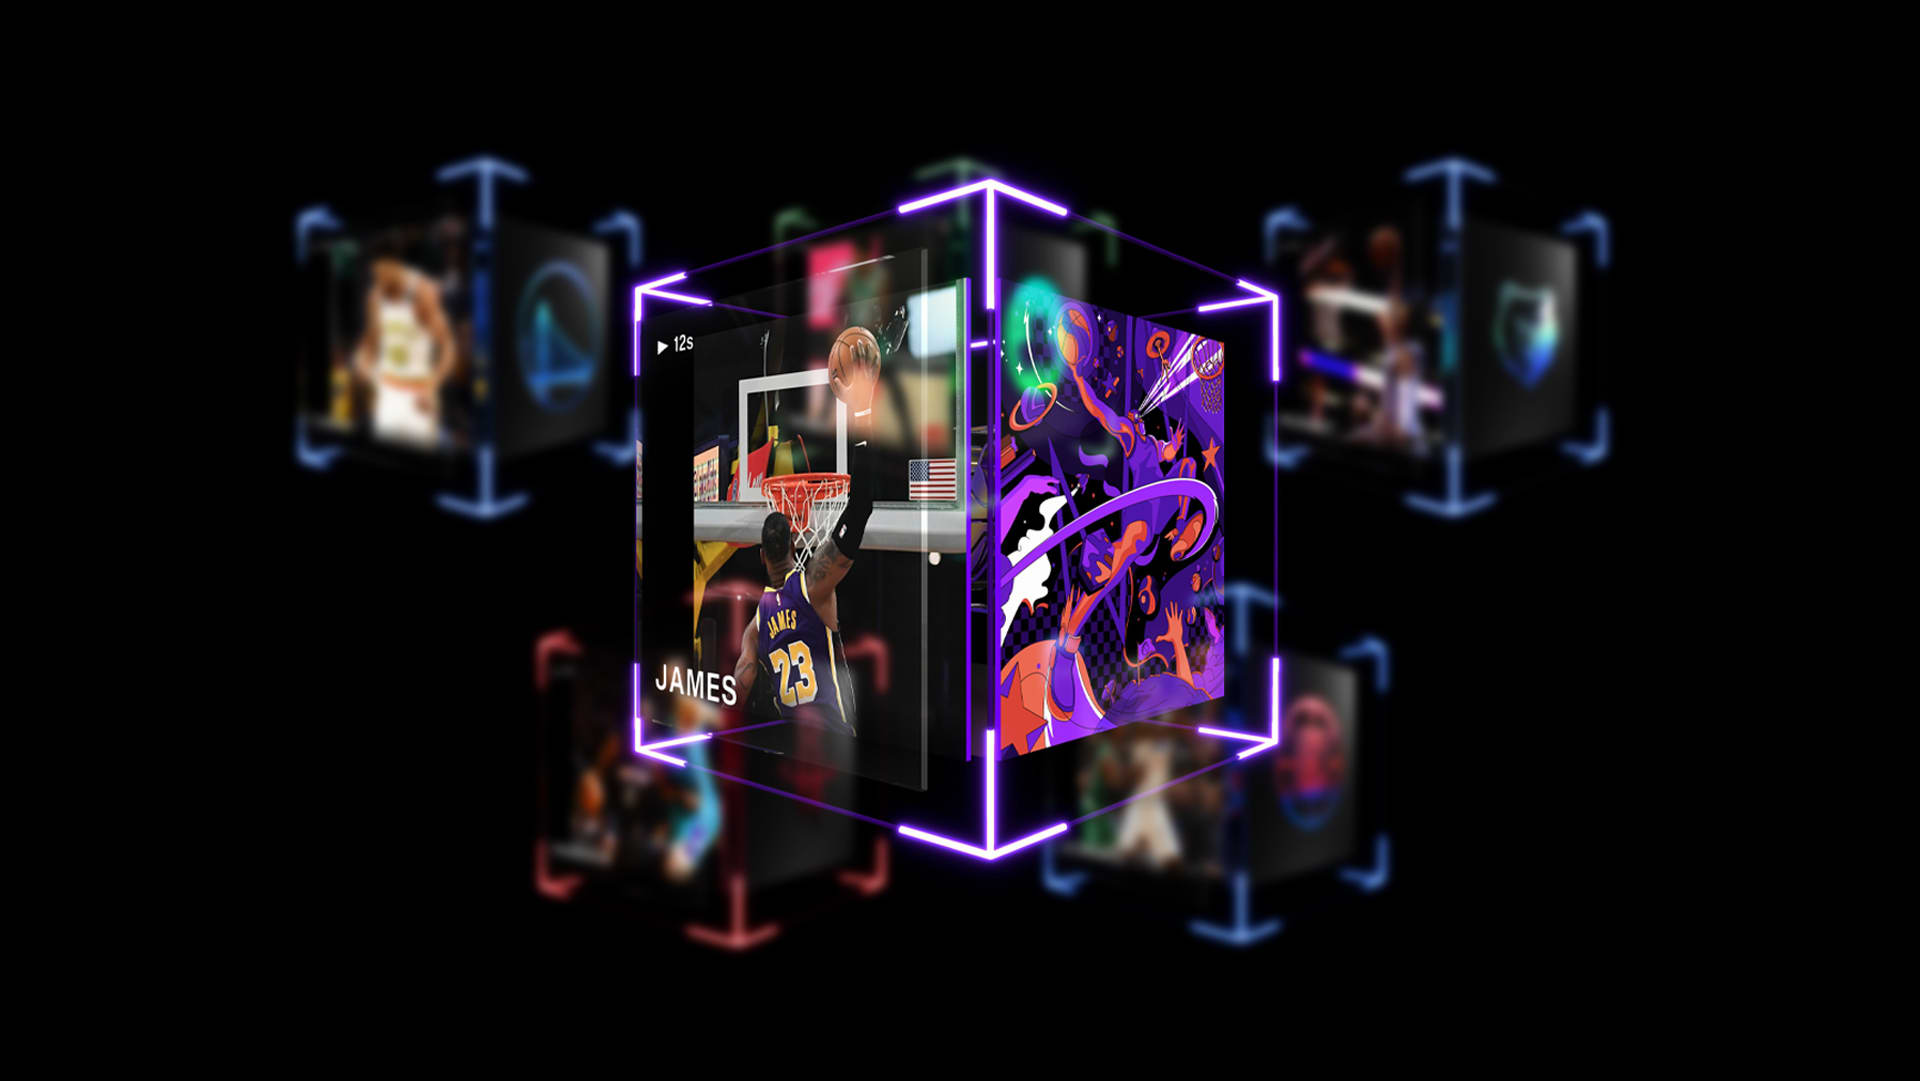 The company behind the NBA’s NFT trading cards is now valued at $2.6 billion